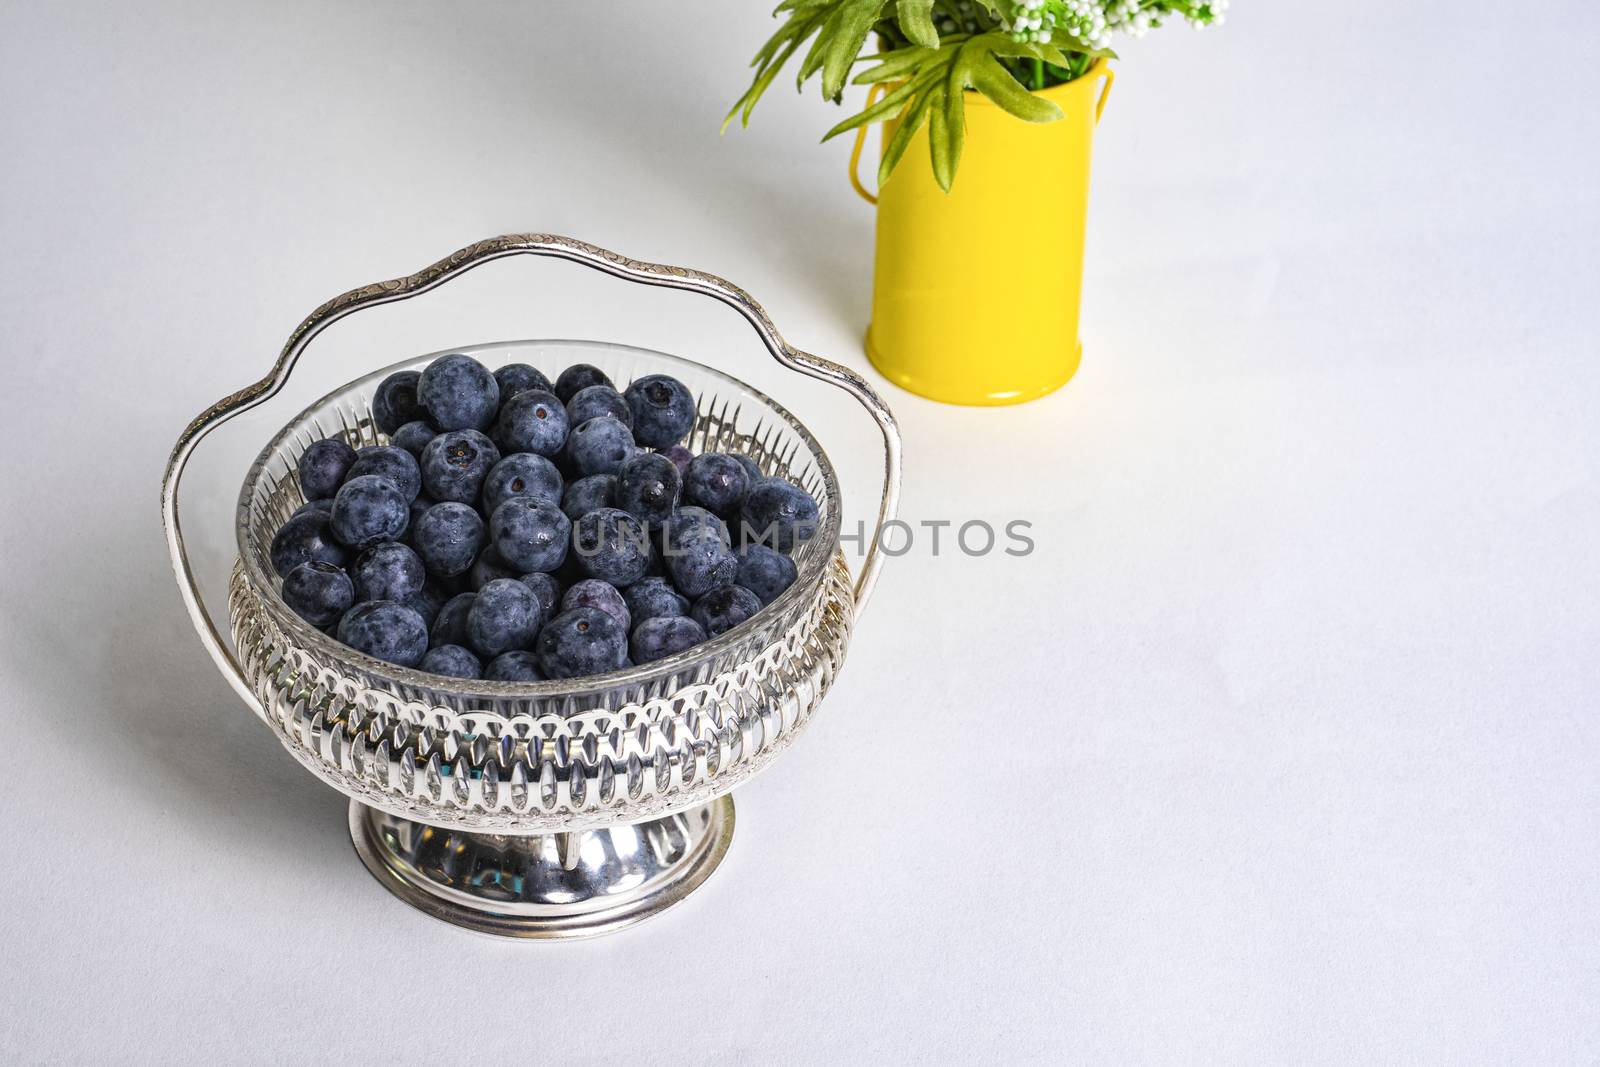 Ripe Blueberries in Silver Bowl by CharlieFloyd